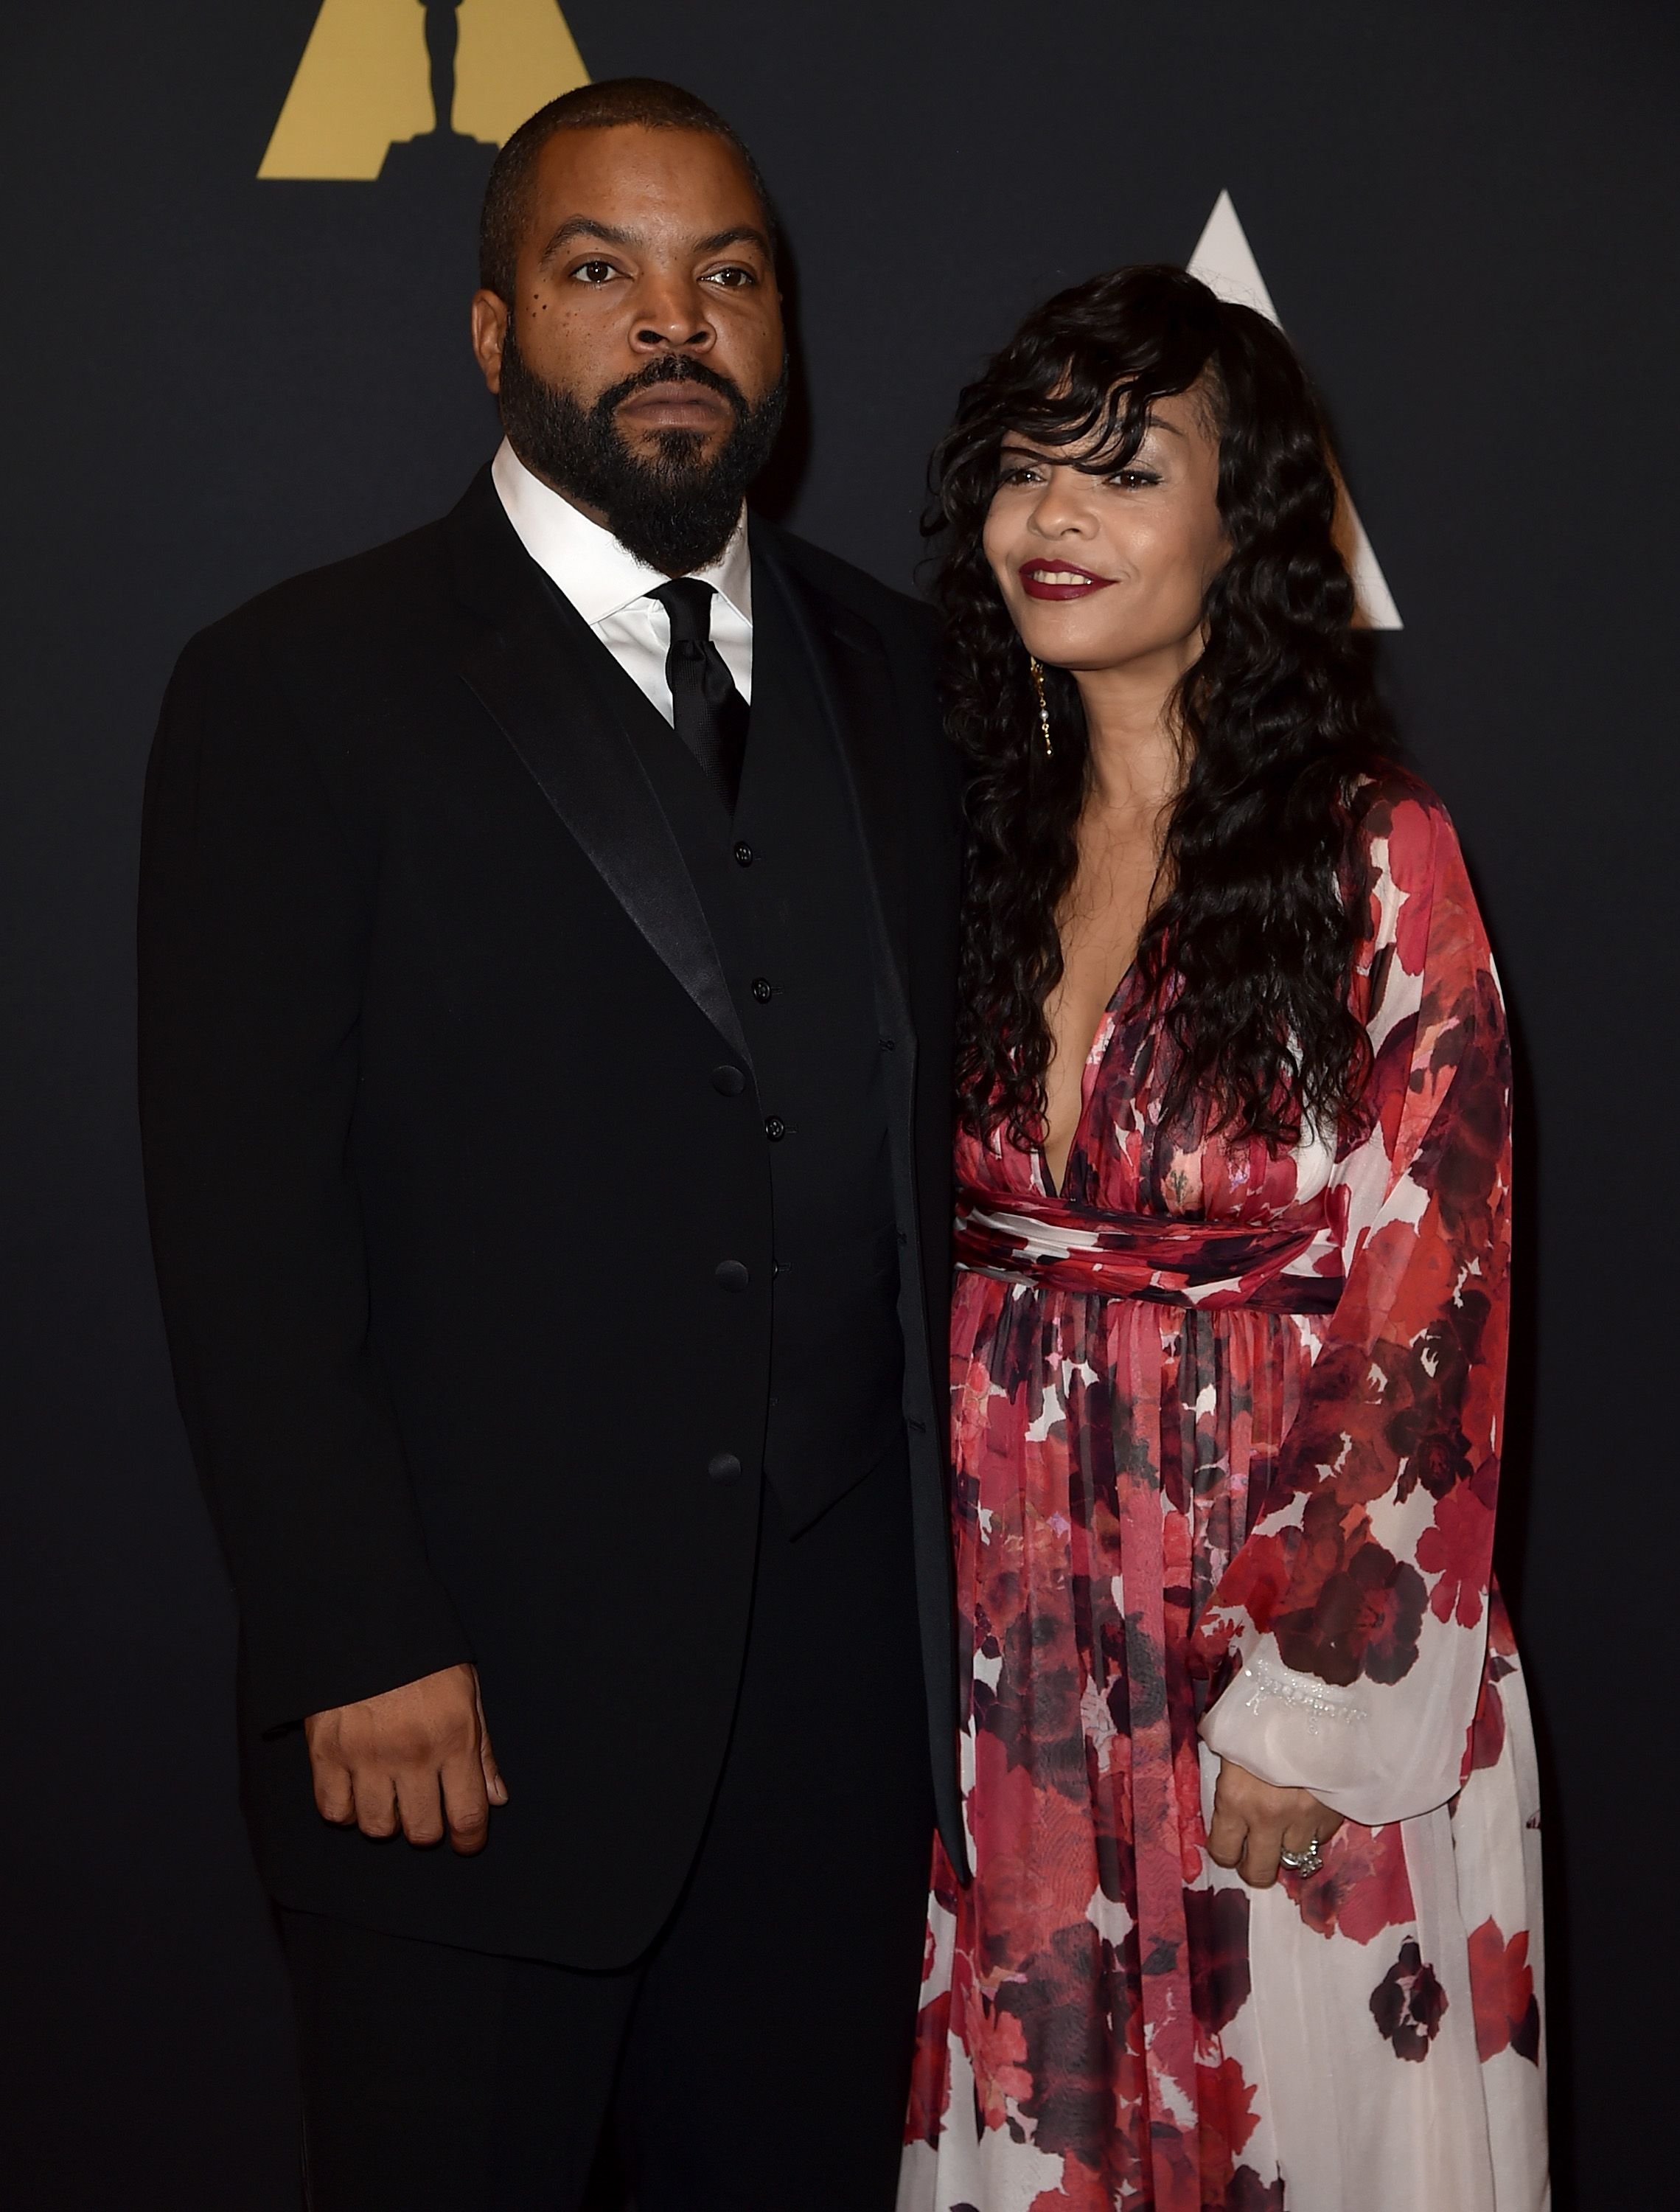 Ice Cube and Kimberly Woodruff during the Academy of Motion Picture Arts and Sciences' 7th annual Governors Awards at The Ray Dolby Ballroom at Hollywood & Highland Center on November 14, 2015 in Hollywood, California. | Source: Getty Images